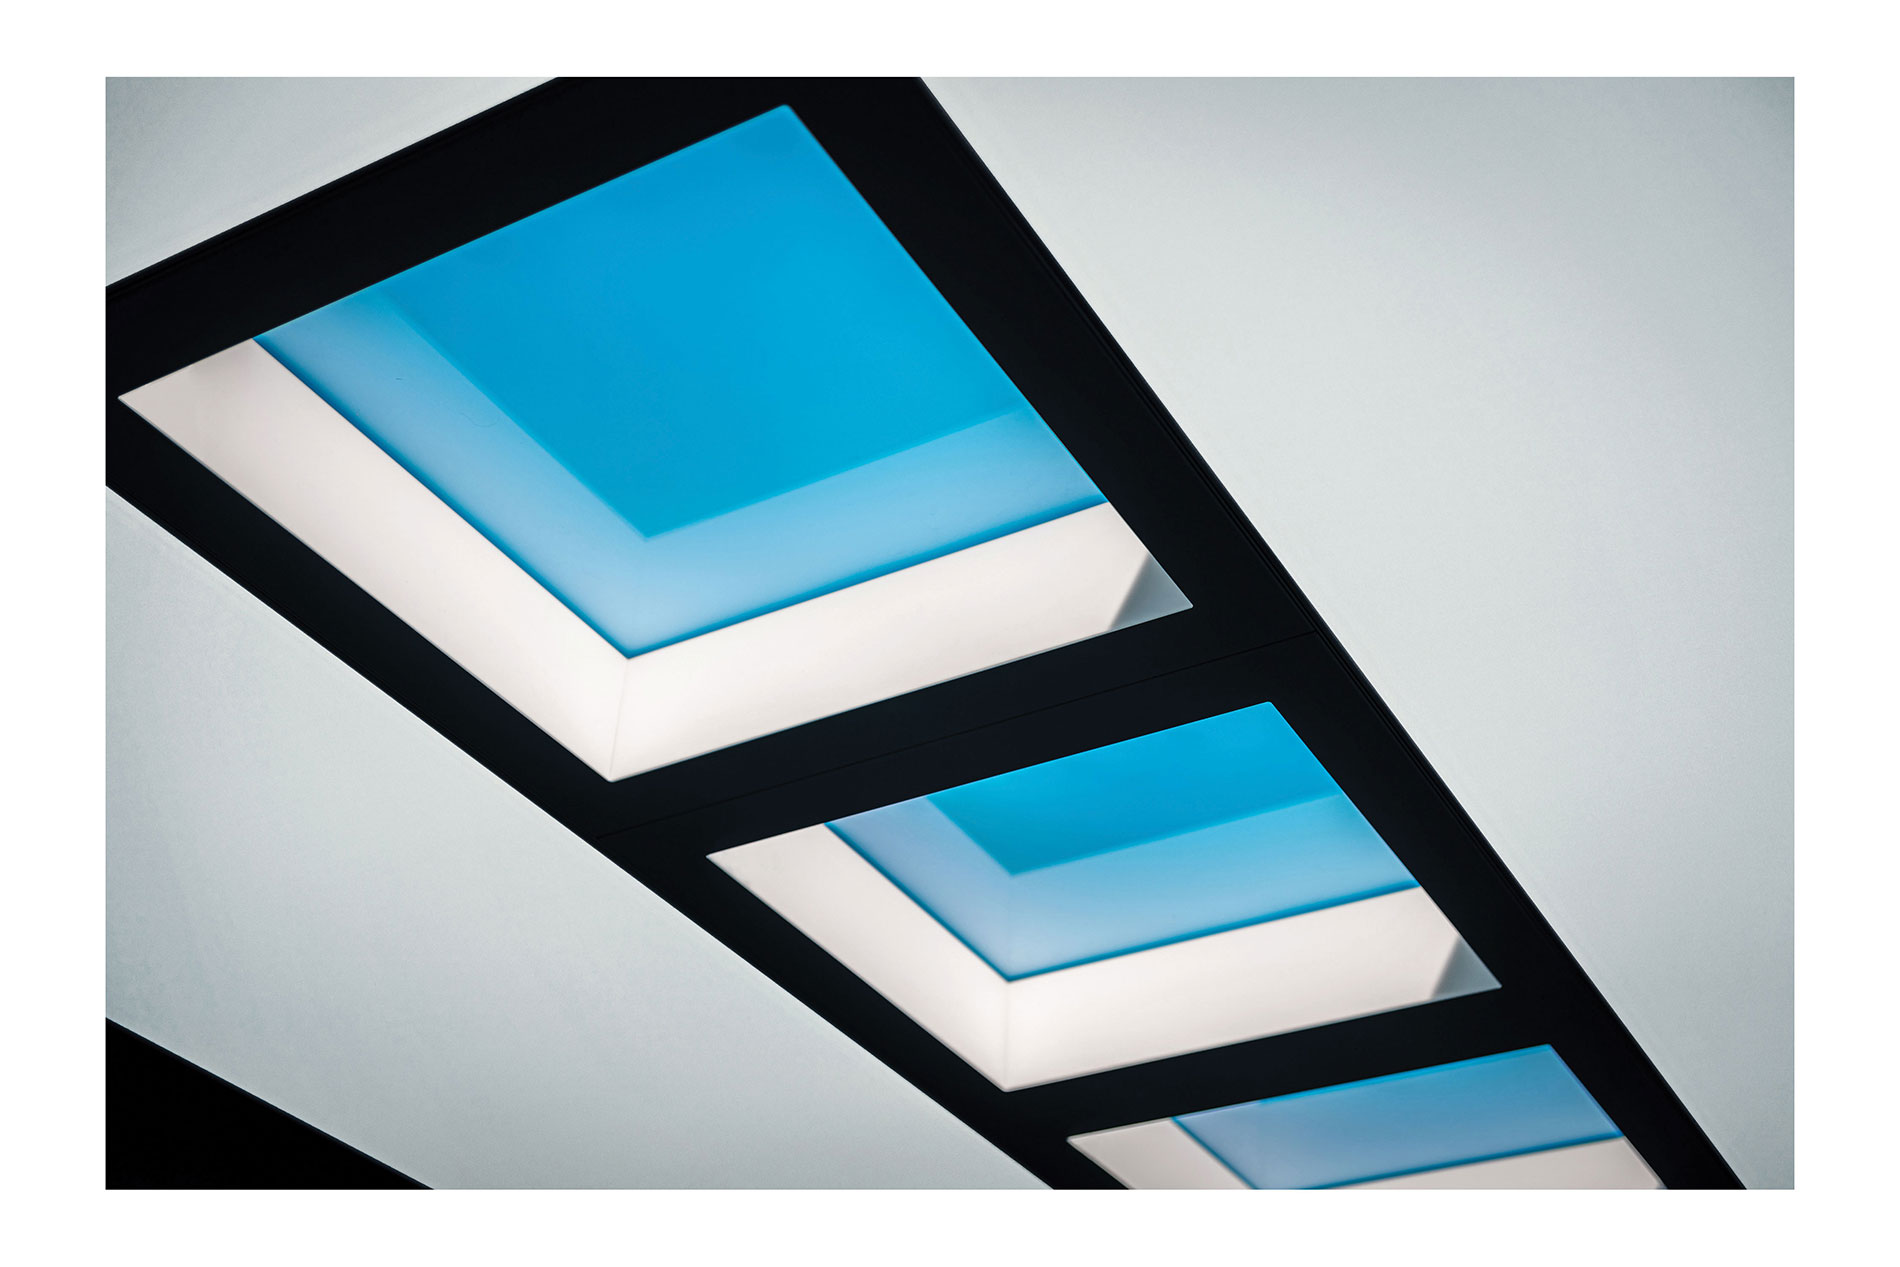 Luminaire designed like a skylight with blue and white lighting. Image by Signify.